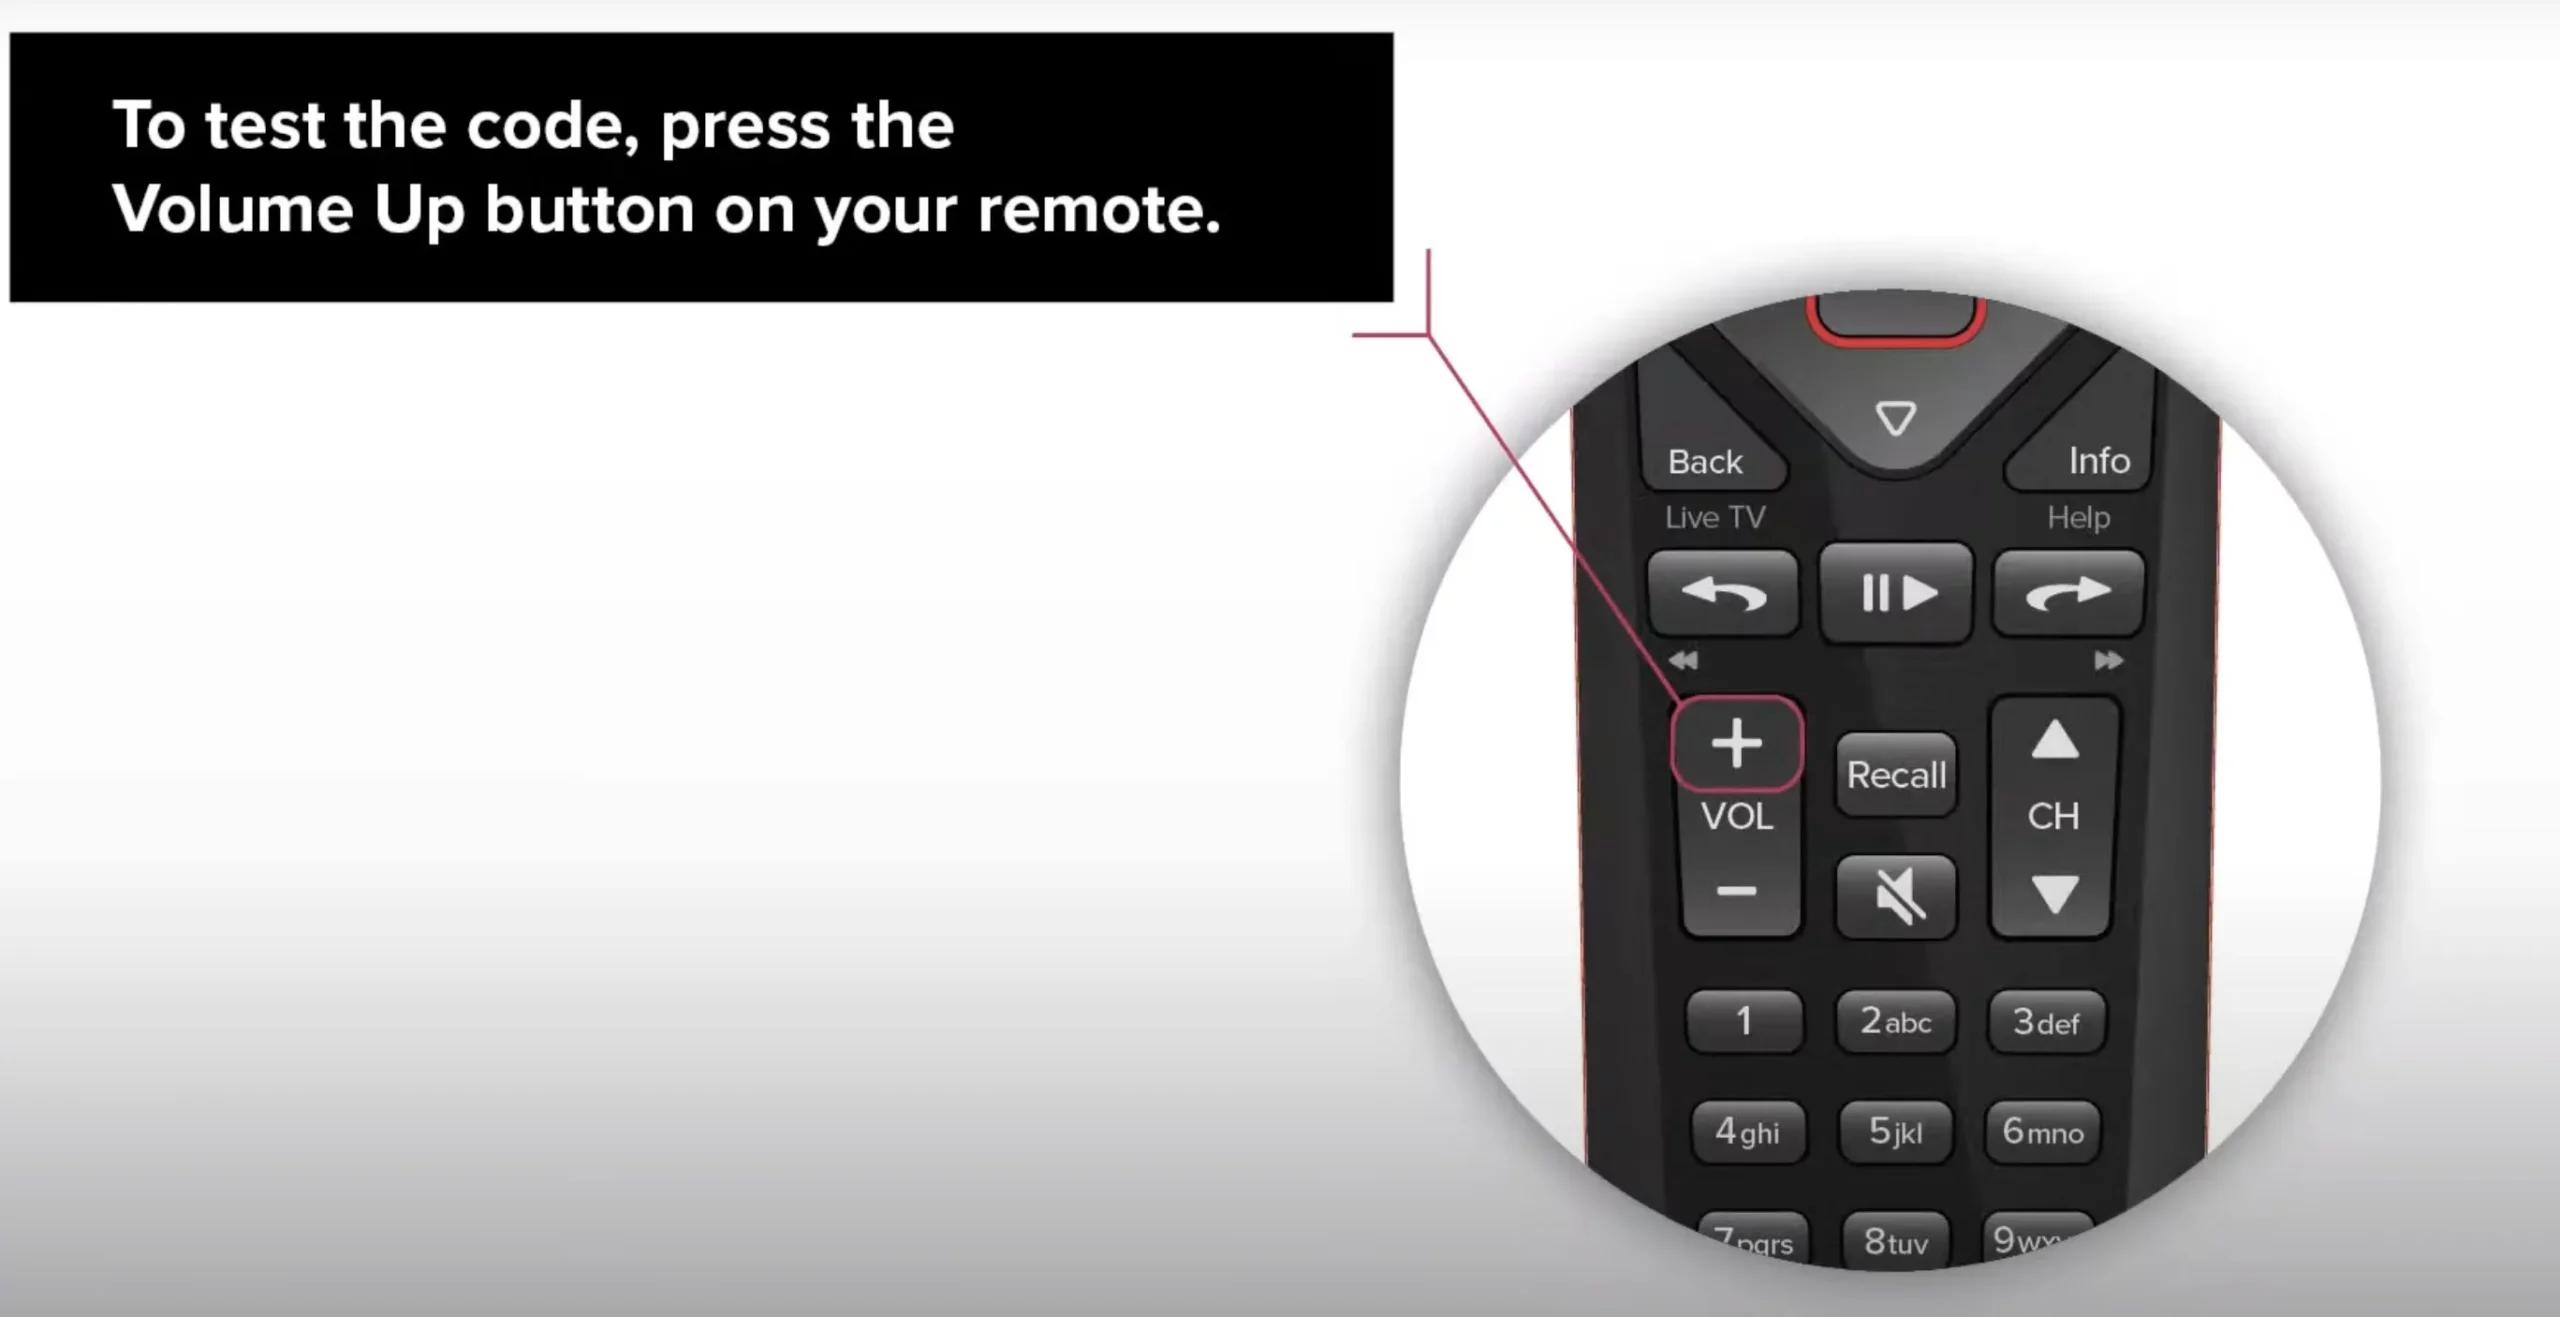 Press the Volume UP button on your Dish Remote Control